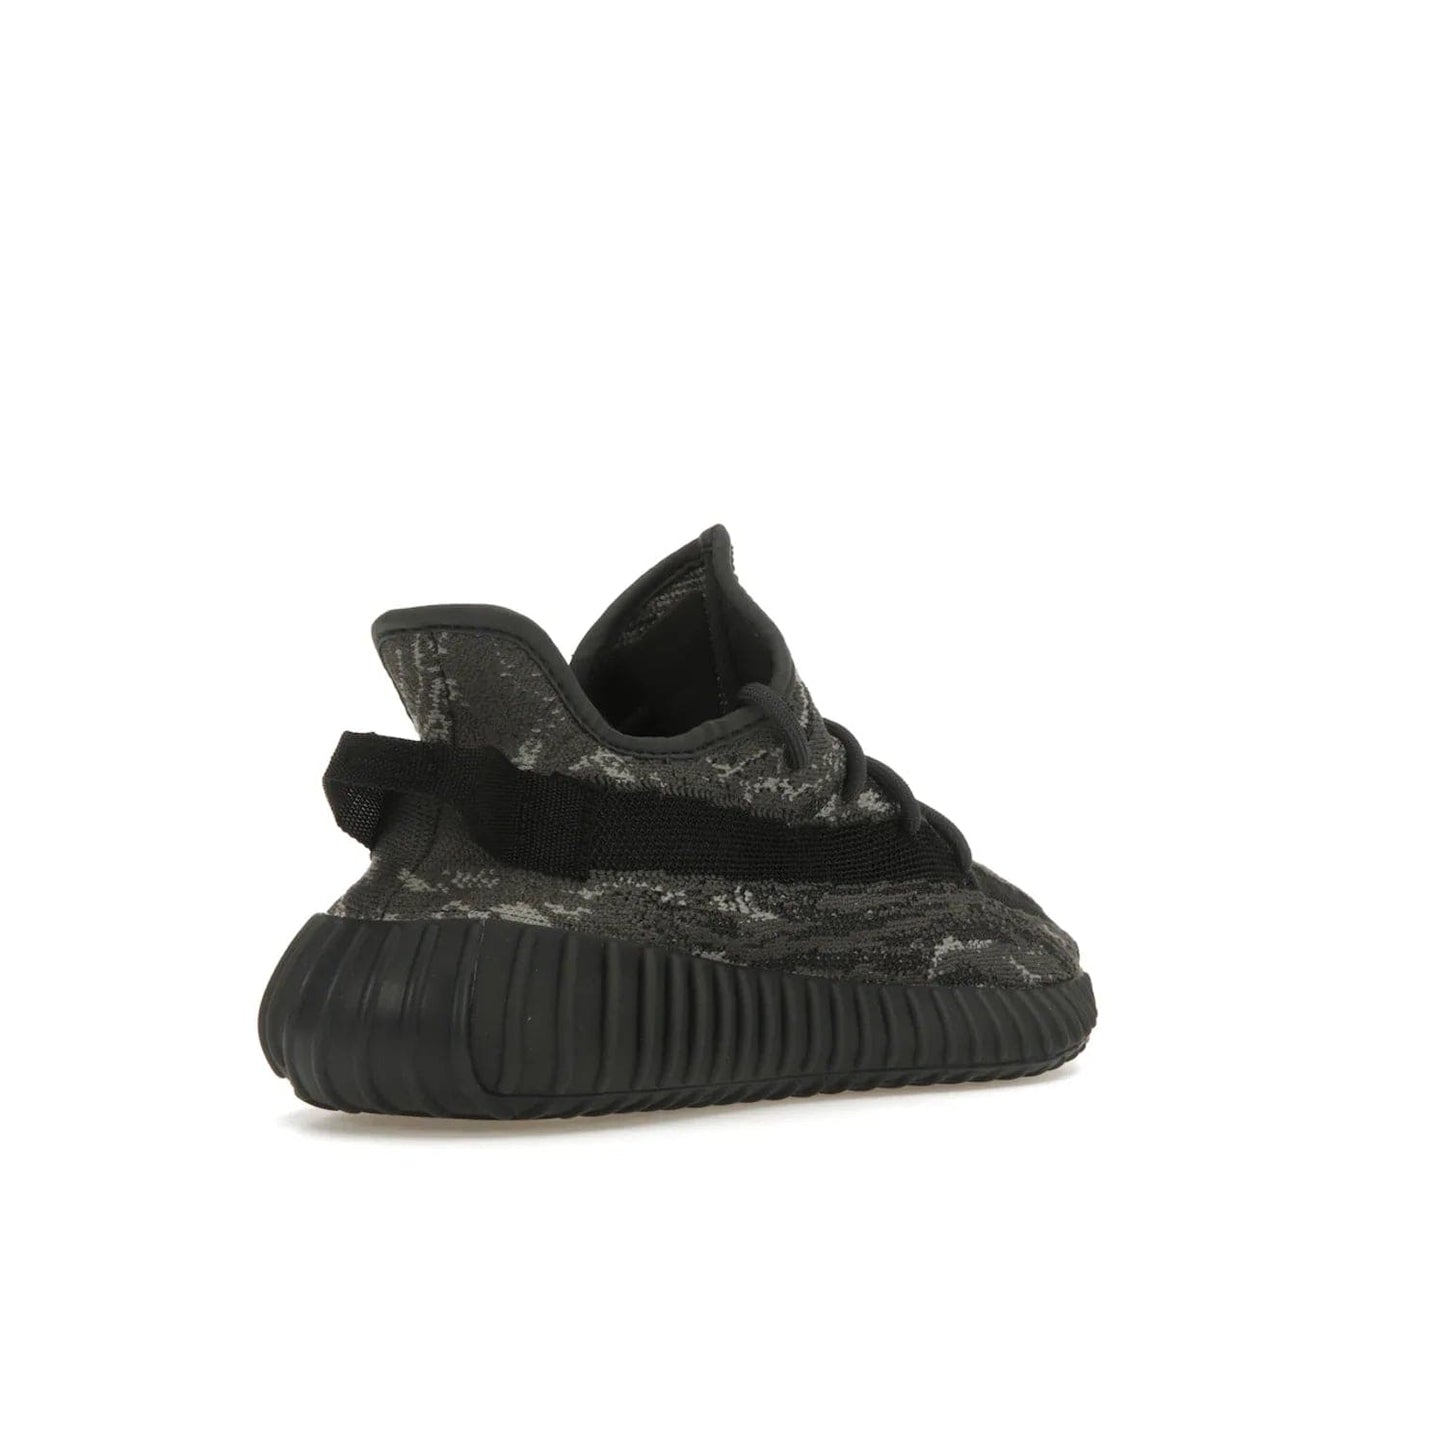 adidas Yeezy Boost 350 V2 MX Dark Salt - Image 32 - Only at www.BallersClubKickz.com - ##
The adidas Yeezy Boost 350 V2 MX Dark Salt offers a contemporary look with a signature combination of grey and black hues. Cushioned Boost midsole and side stripe allow for all day wear. Get the perfect fashion-forward addition with this sleek sneaker for $230.